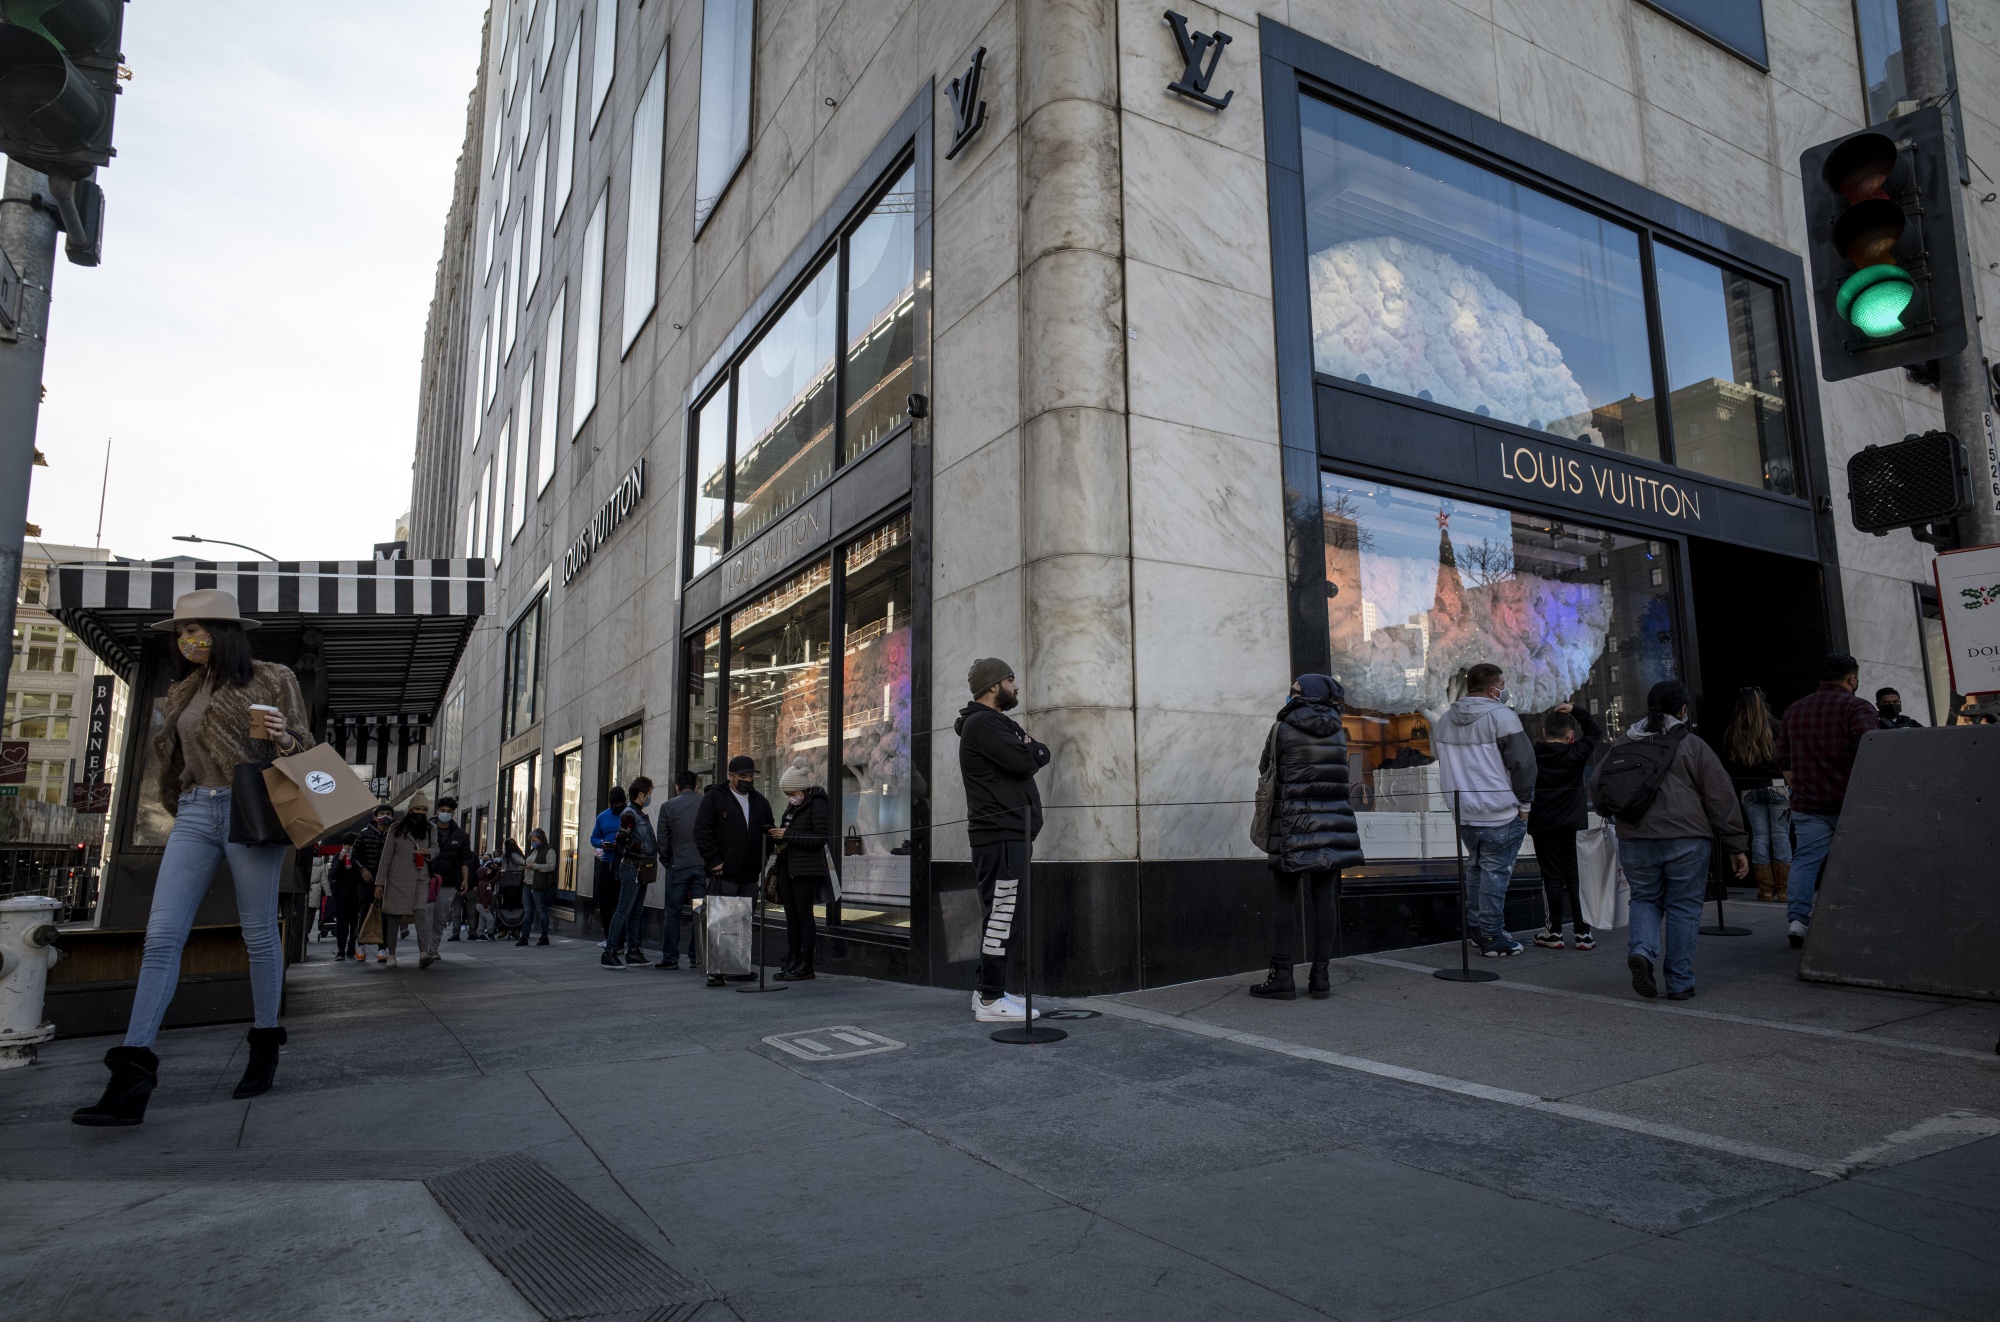 Louis Vuitton Sales Surge Helps LVMH Weather Covid Lockdowns